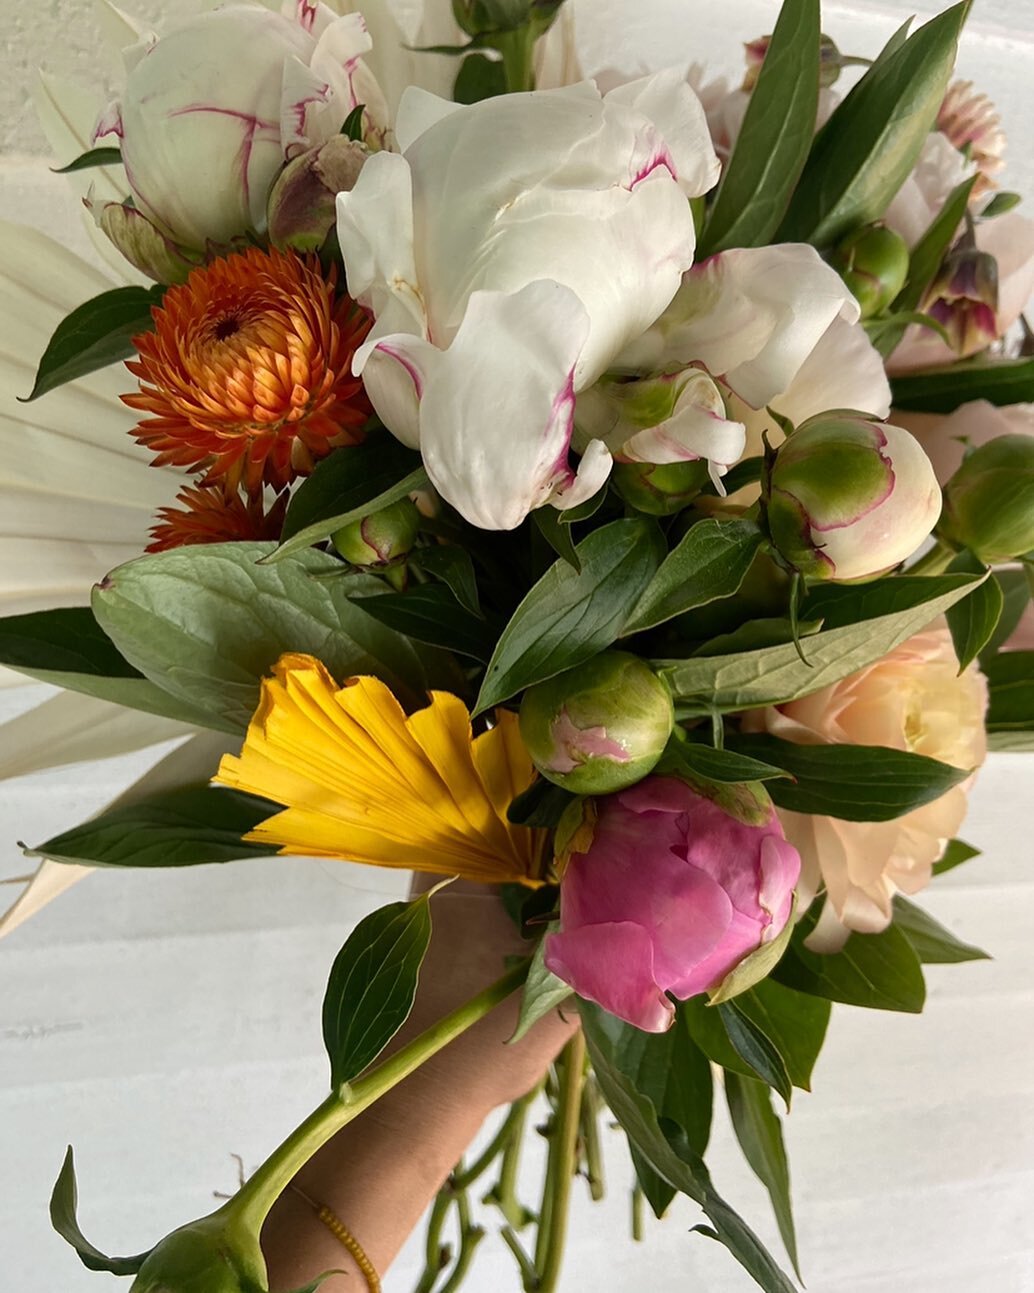 MOTHER&rsquo;S DAY WEEKEND FLOWERS&bull;
I&rsquo;m not sure how time moved so quickly &hellip; but here we are again ! Below you will find all the info regarding ordering flowers / delivery options / flower retail locations.
Please contact us through